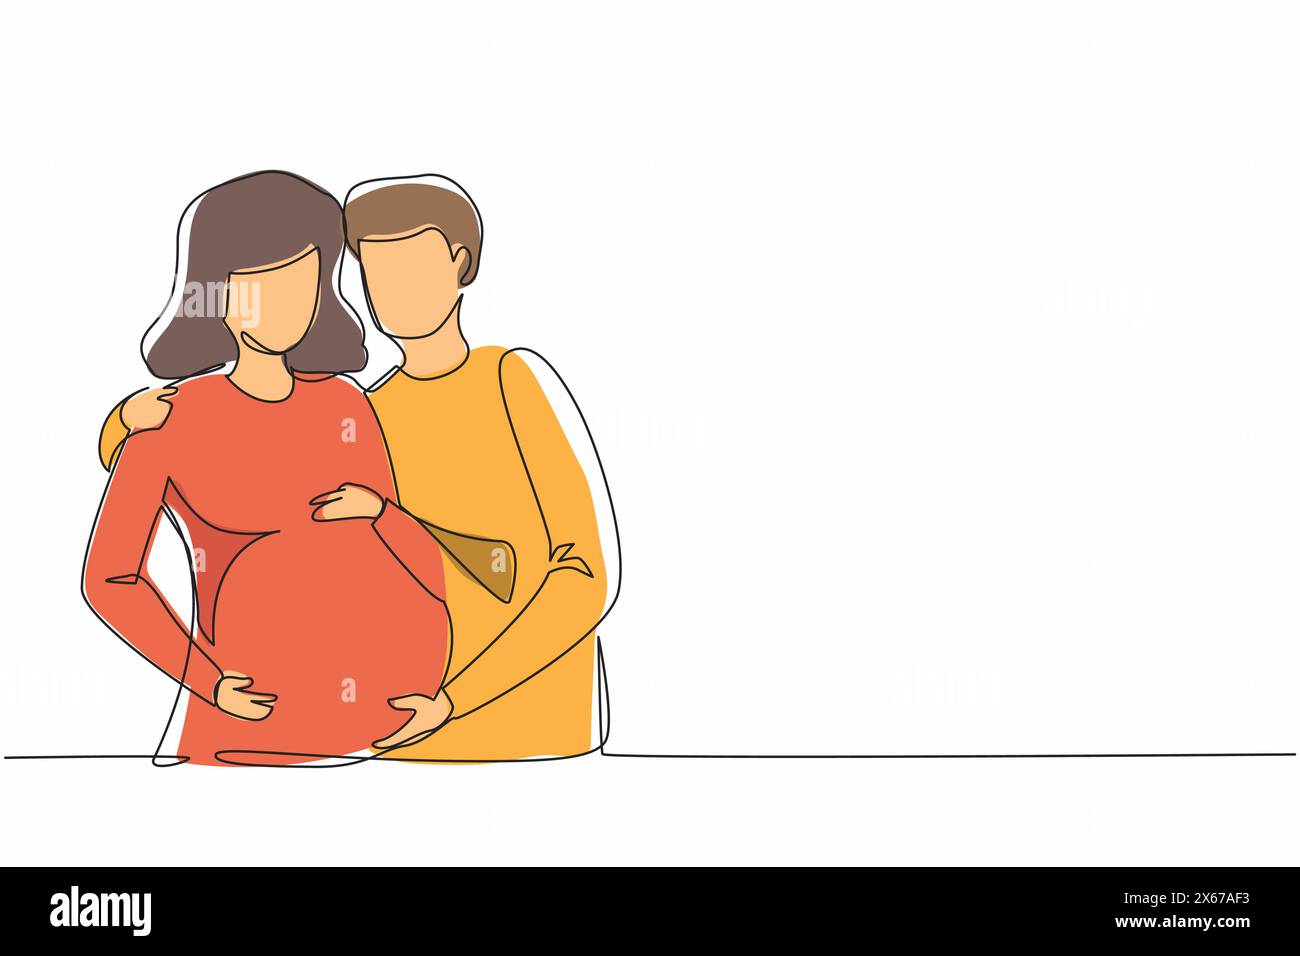 Single continuous line drawing flat illustration about pregnancy and partner birth. Young pregnant woman with husband. Man takes care and hugs his wif Stock Vector